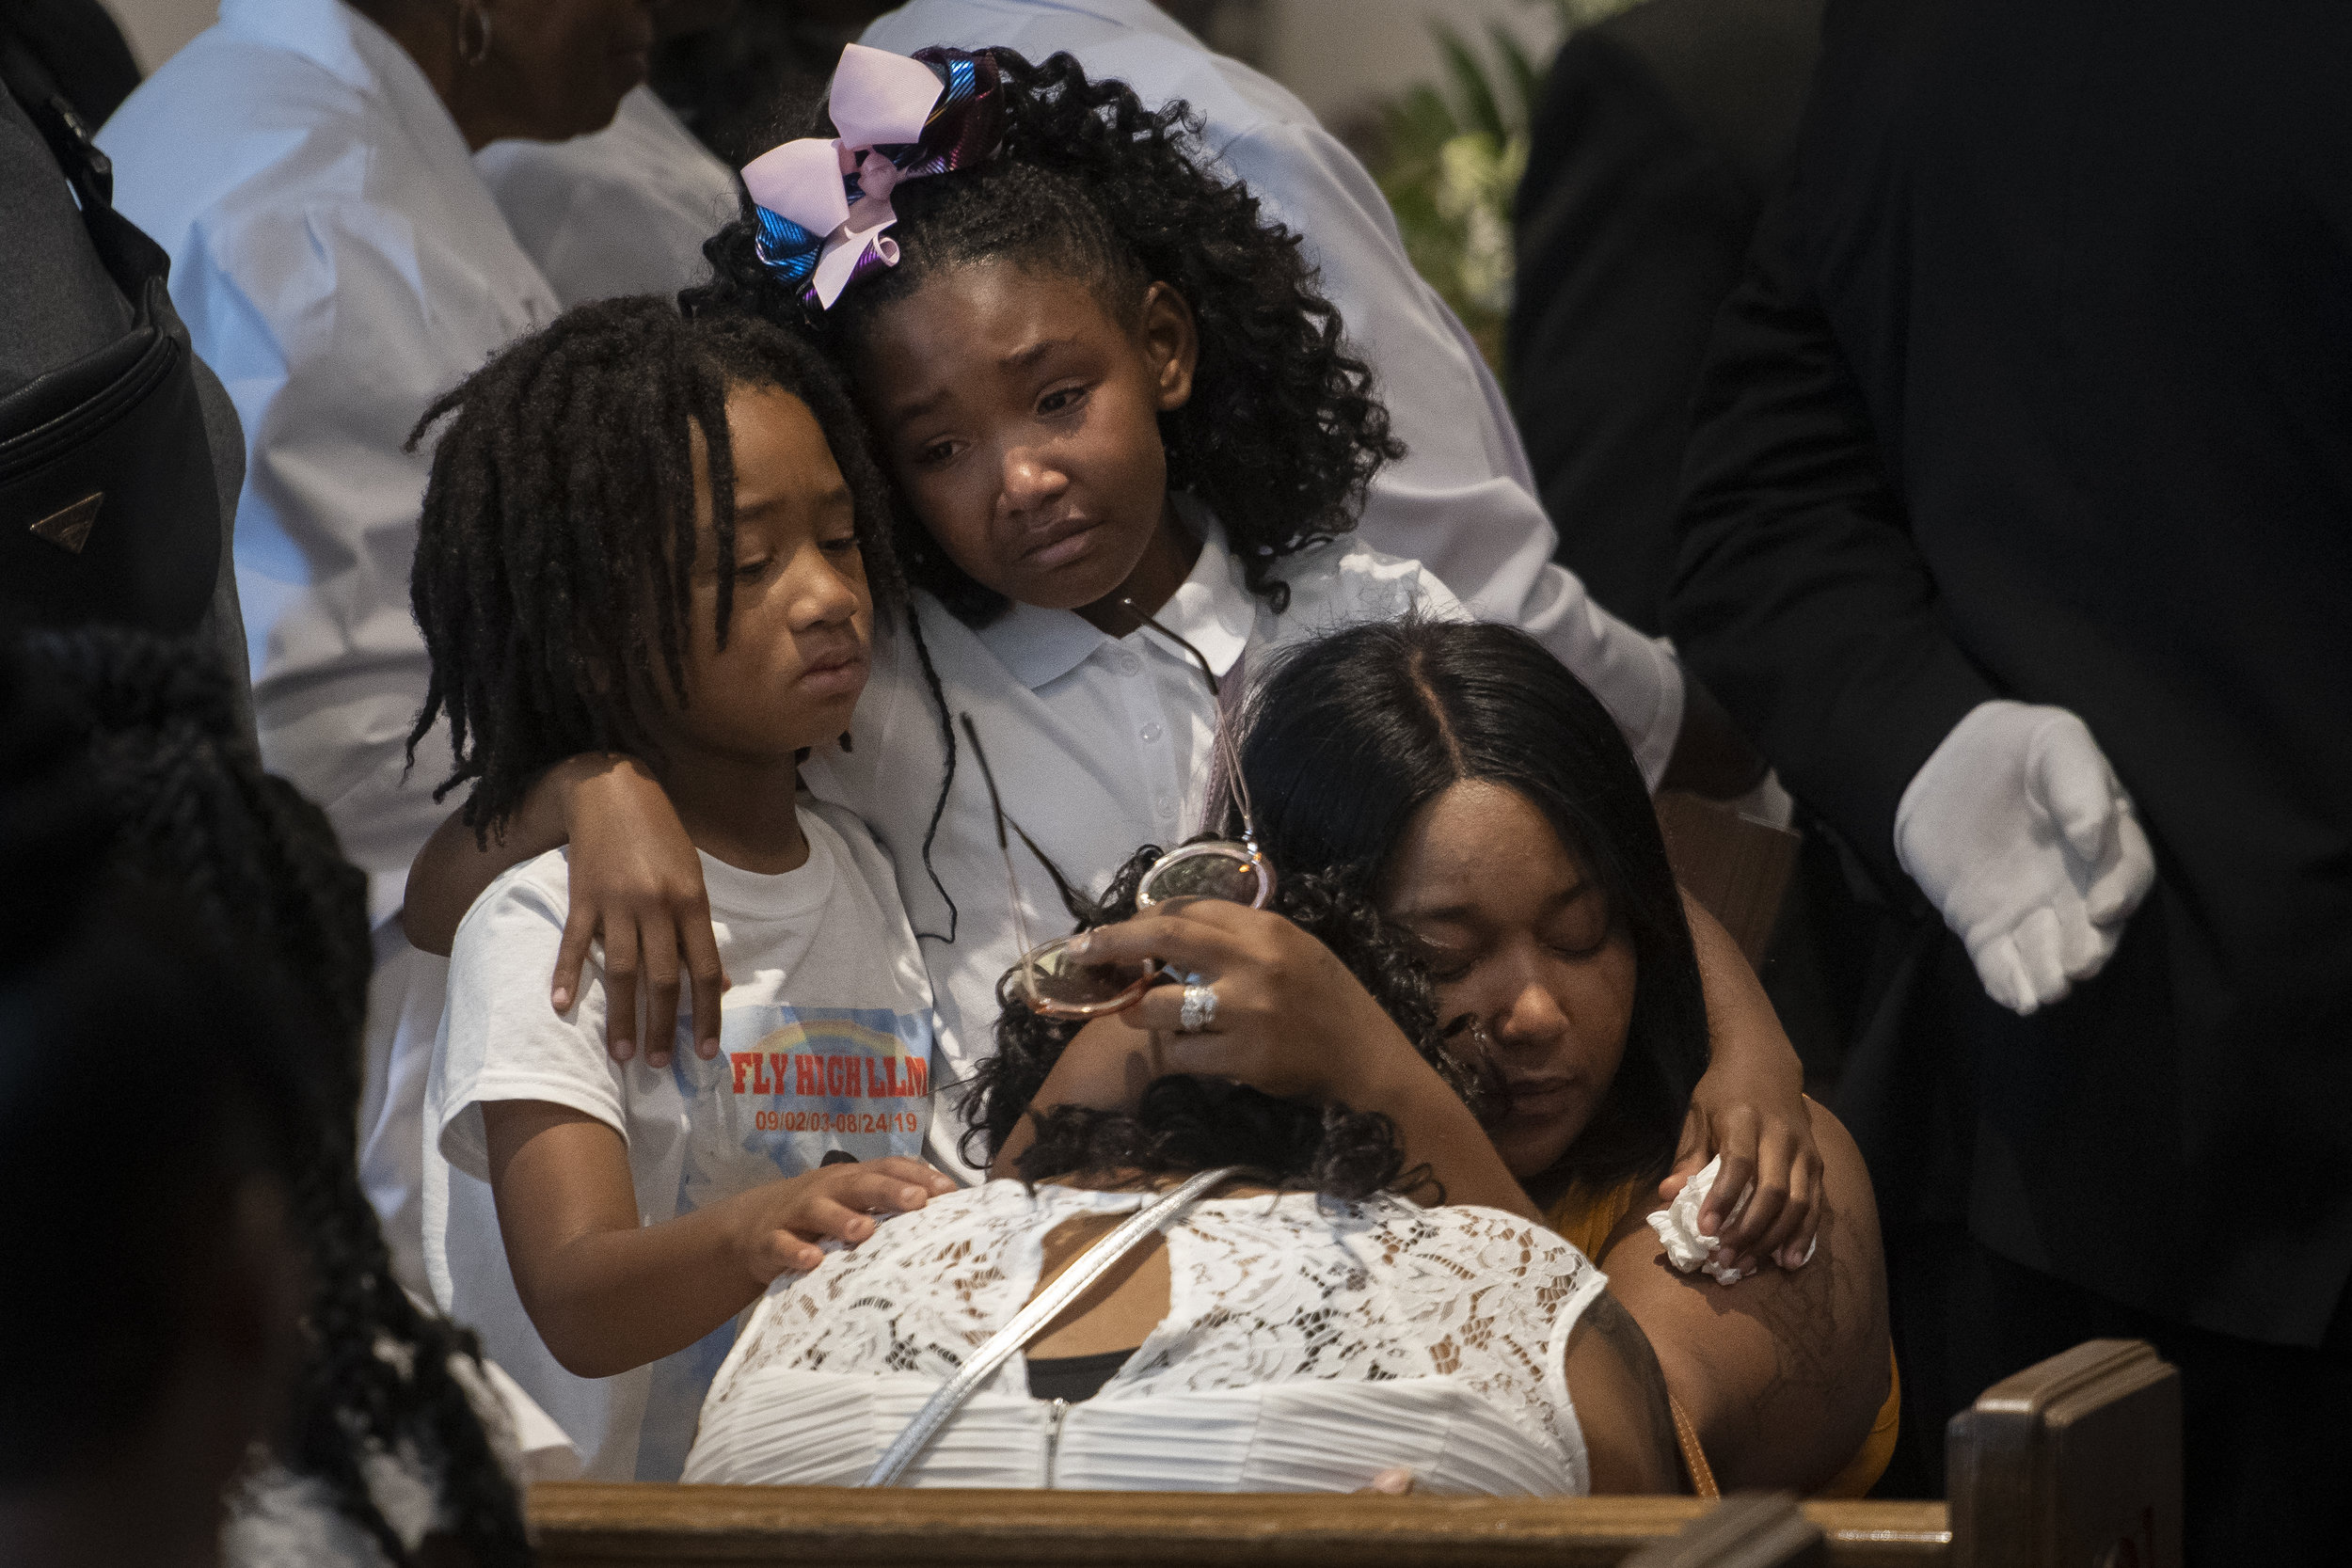  Monday was 16 years since the birth of Madison Robinson; Tuesday was her funeral. Robinson died after being shot Aug. 24 on the front porch of her Cape Girardeau home. Scores turned out for Robinson’s visitation and funeral Sept. 3 at Mercy Seat Mis